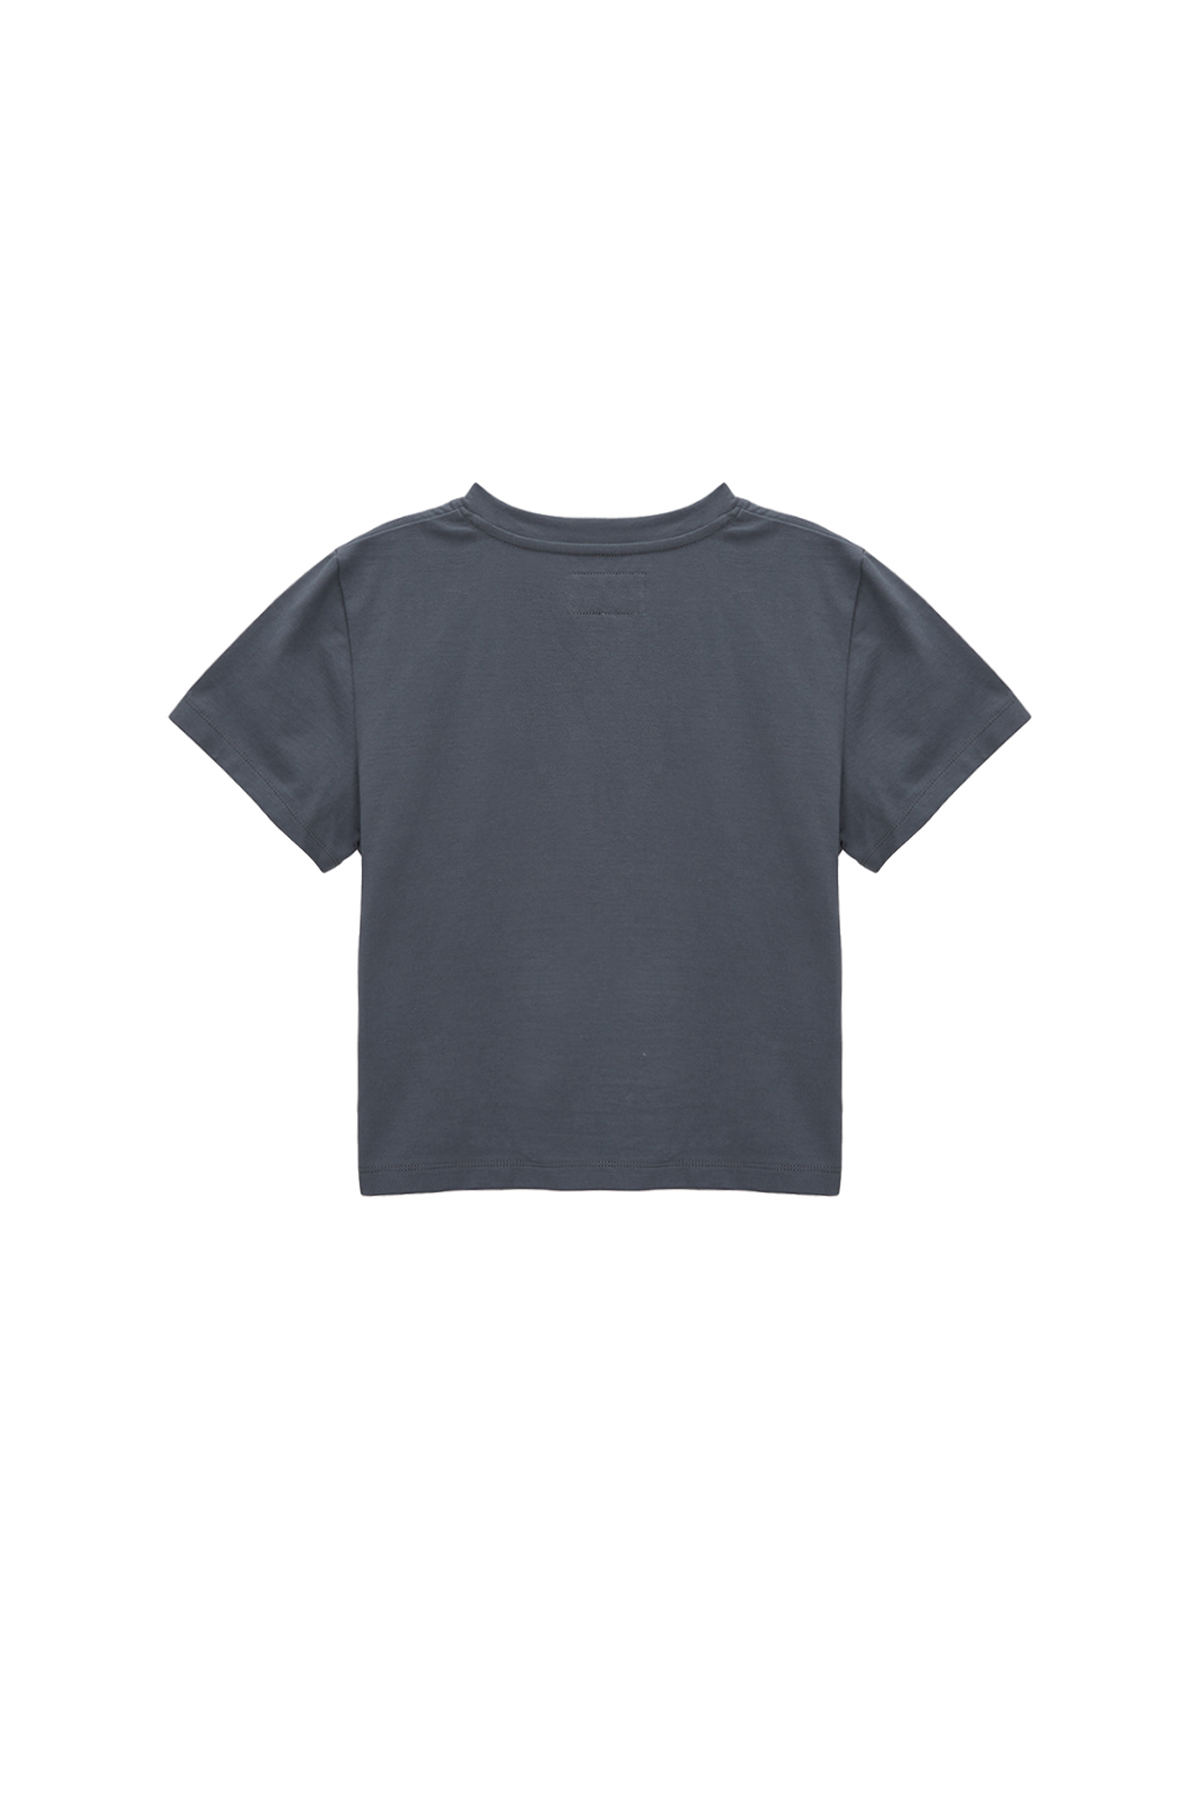 BLURRED LOGO CROP TOP IN CHARCOAL